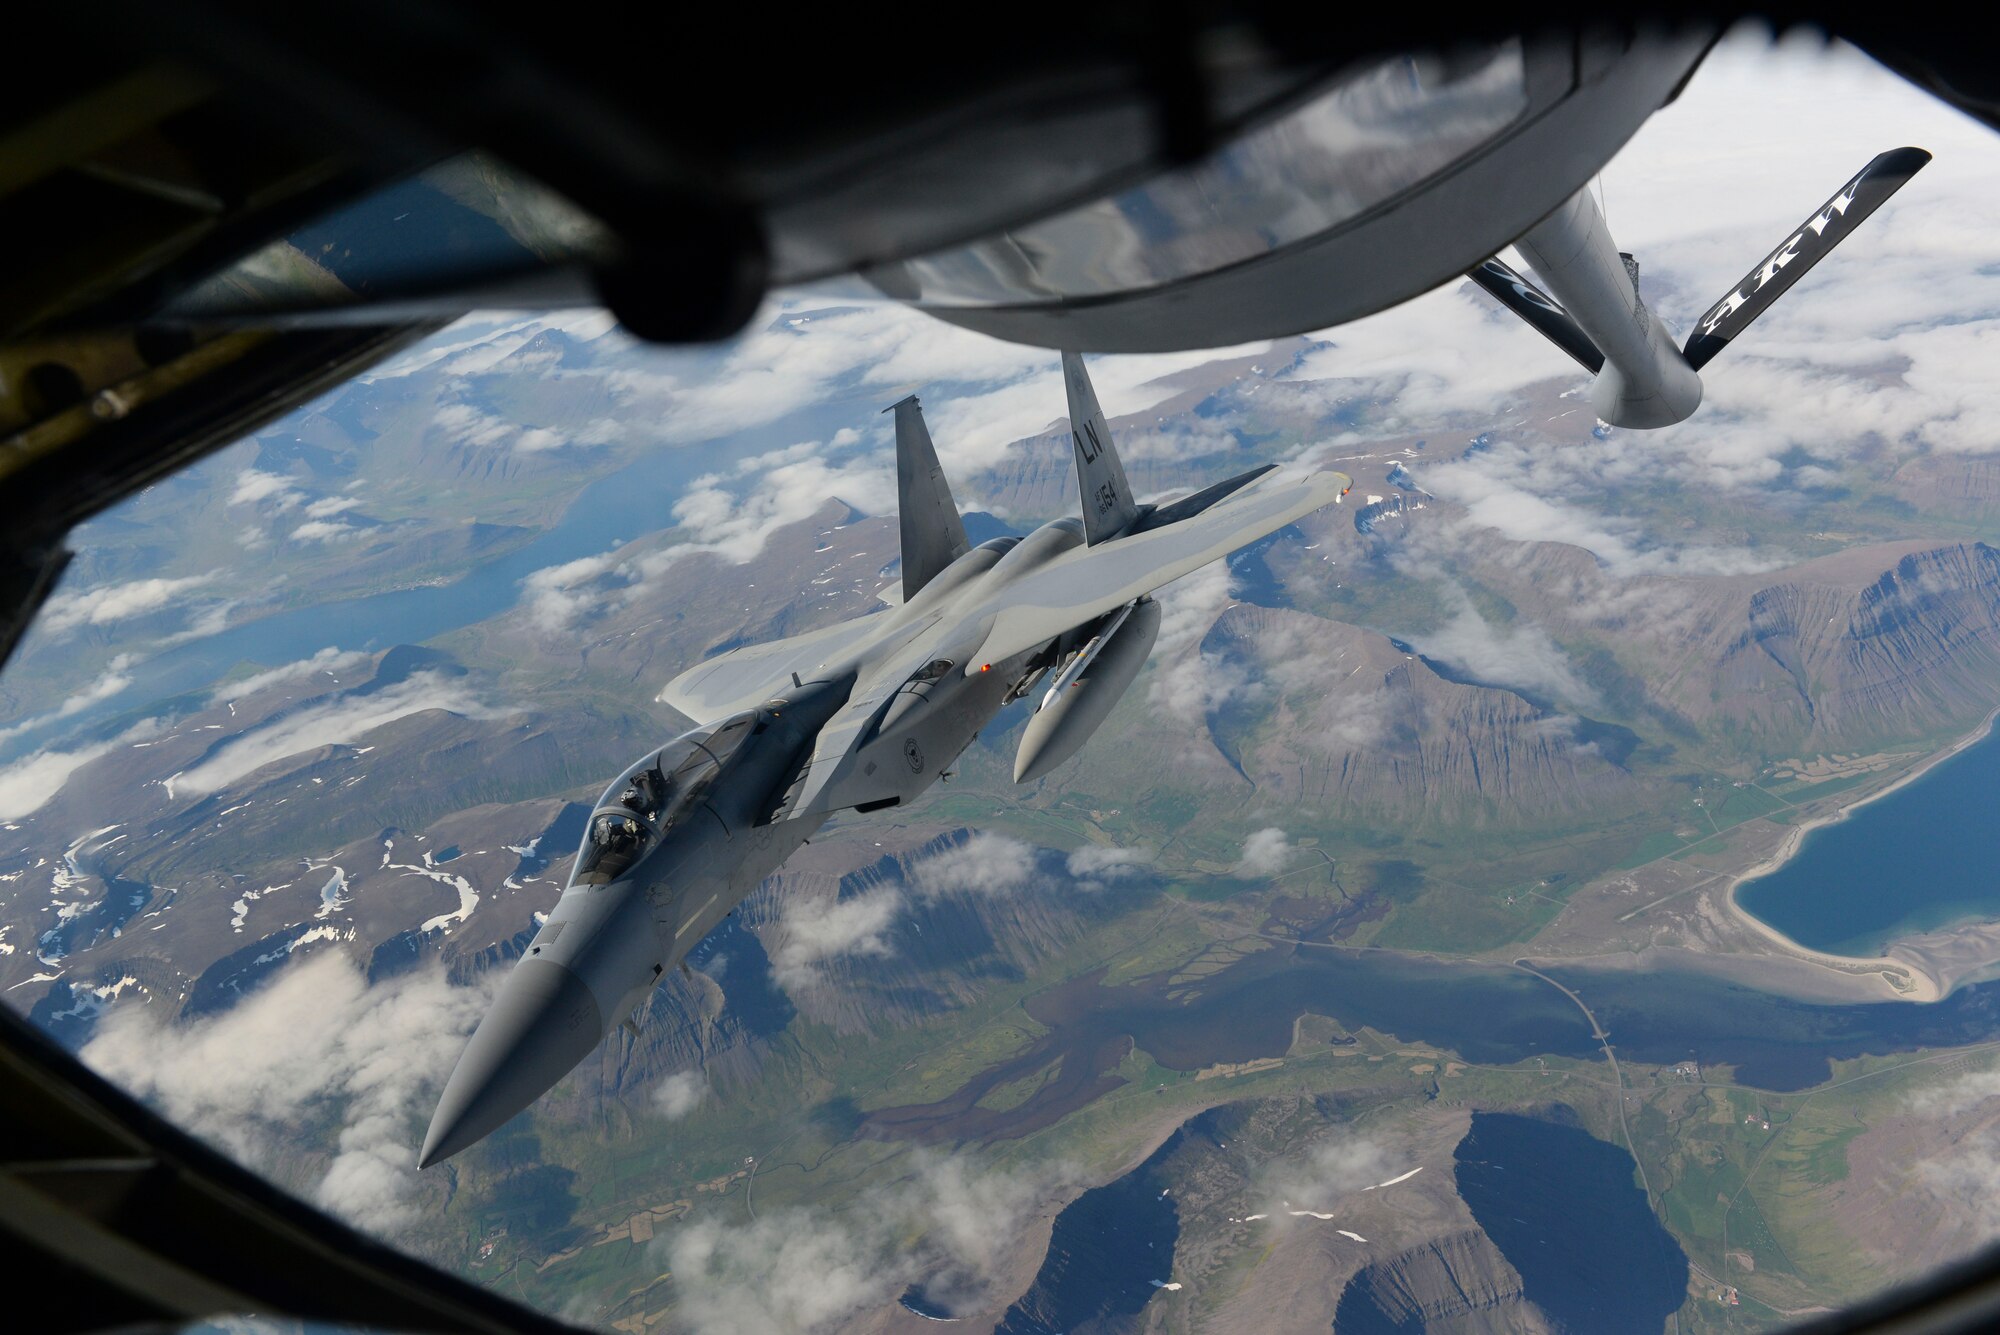 A U.S. Air Force F-15C Eagle assigned to the 493rd Expeditionary Fighter Squadron flies near a KC-135 Stratotanker assigned to the 351st Air Refueling Squadron over Iceland, Aug. 10, 2018. Airmen from the 48th Fighter Wing, RAF Lakenheath, England, deployed to Keflavik Air Base, Iceland, to conduct an air surveillance mission in support of NATO alliance commitments. (U.S. Air Force photo by Airman 1st Class Alexandria Lee)